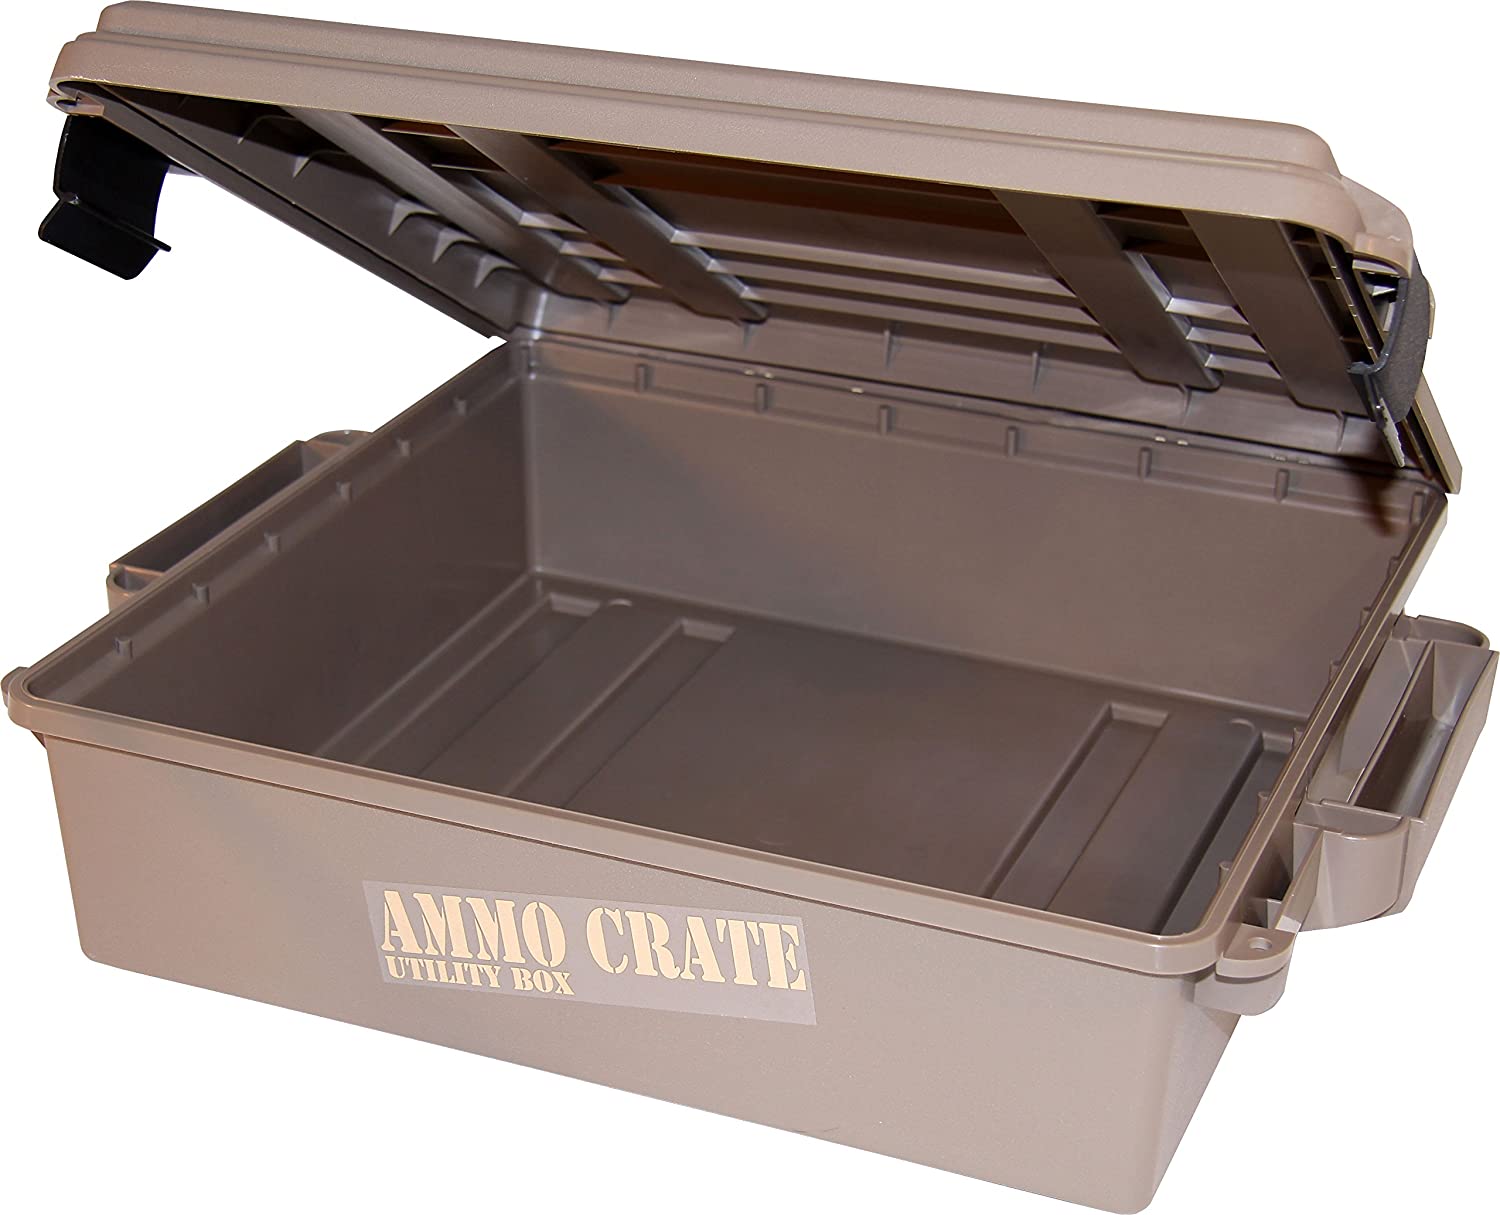 ACR5-72 - Ammo Crate Utility Box - 20 boxes of 12 gauge